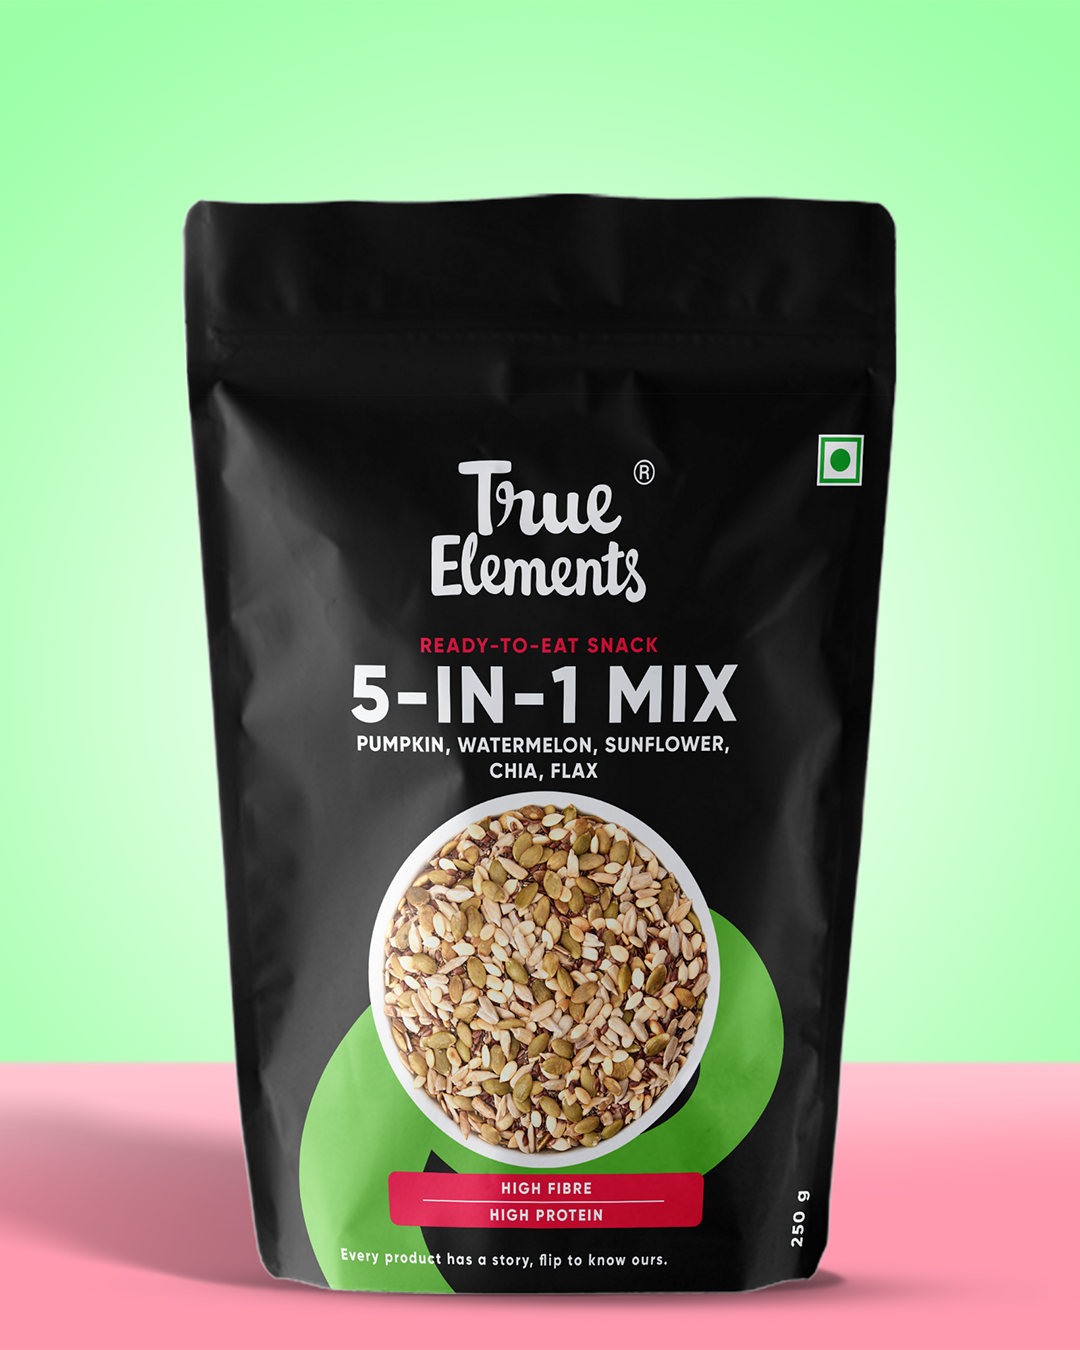 5 in 1 mix with pumpkin, watermelon, sunflower, chia and flax in 250g pouch.